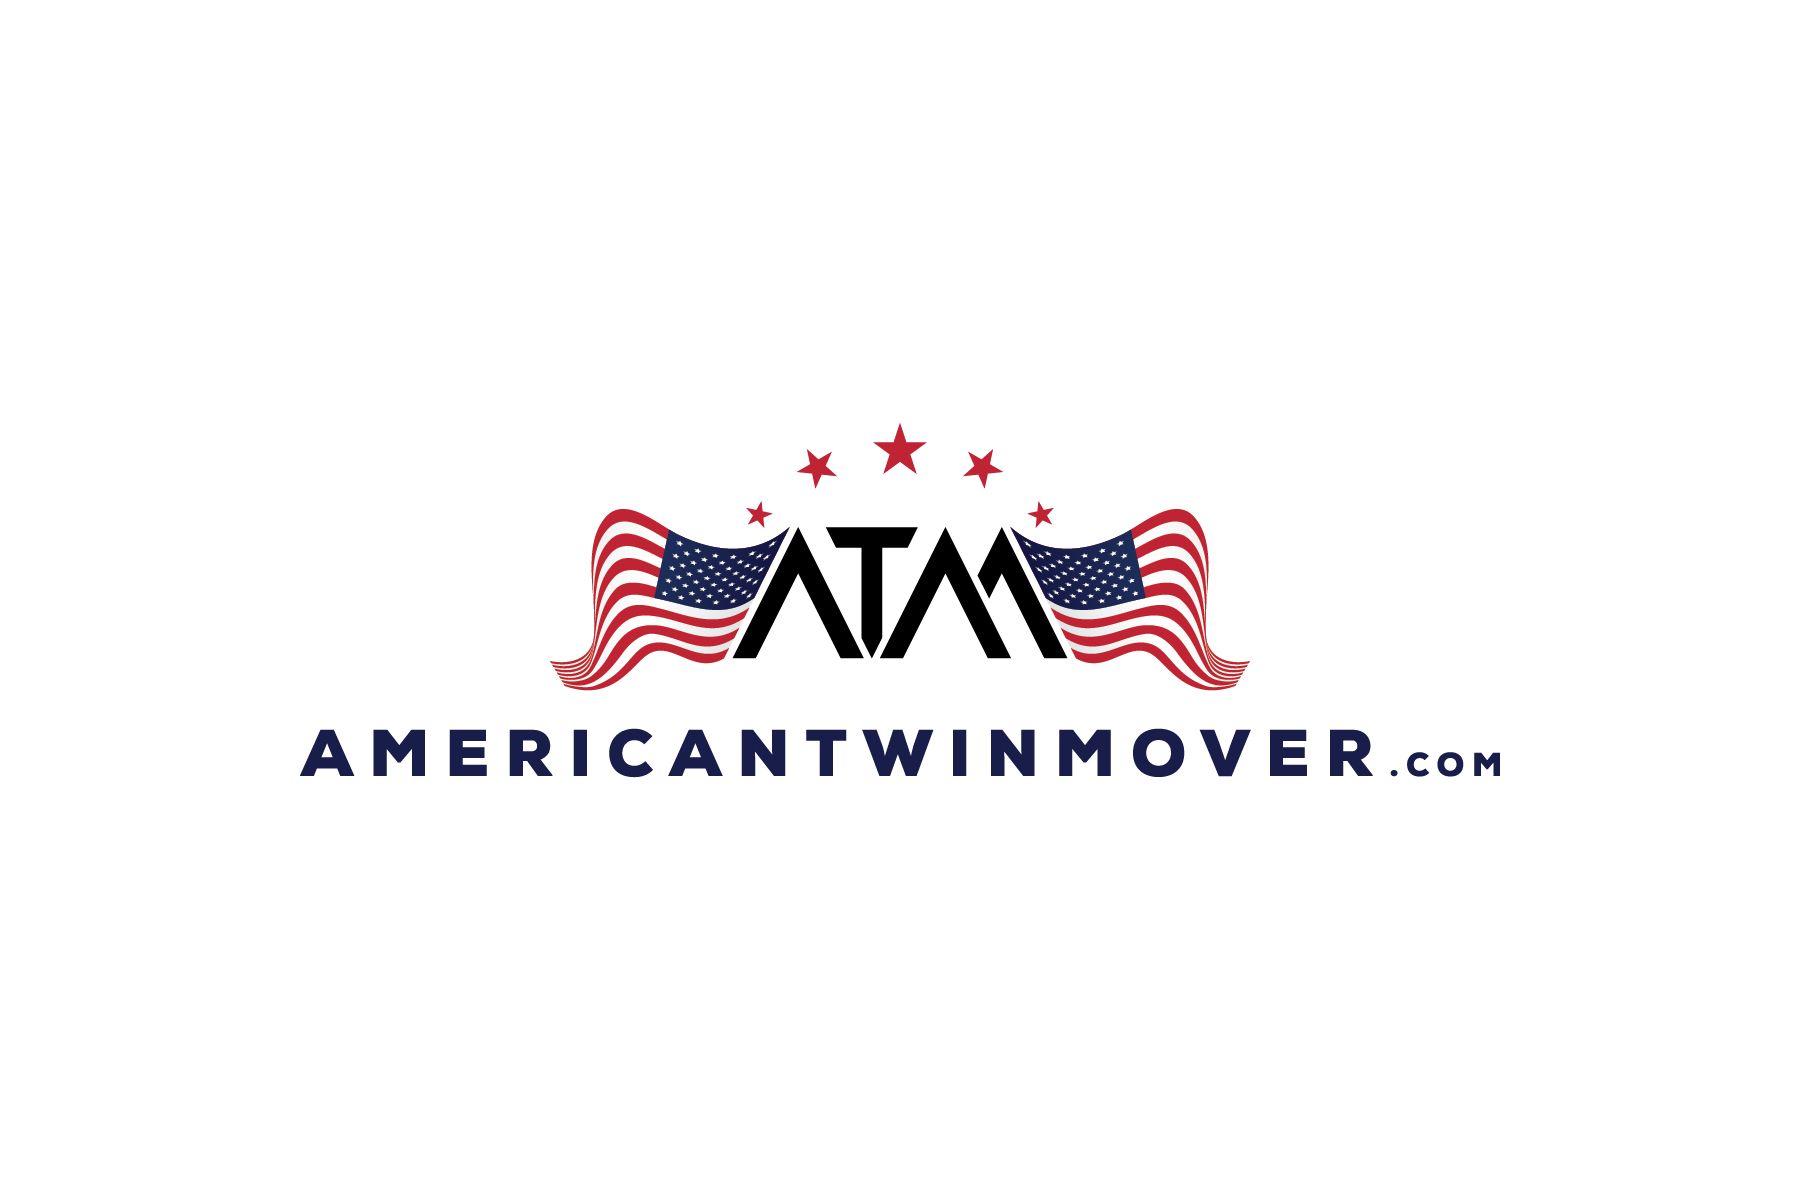 American Twin Mover Annapolis review